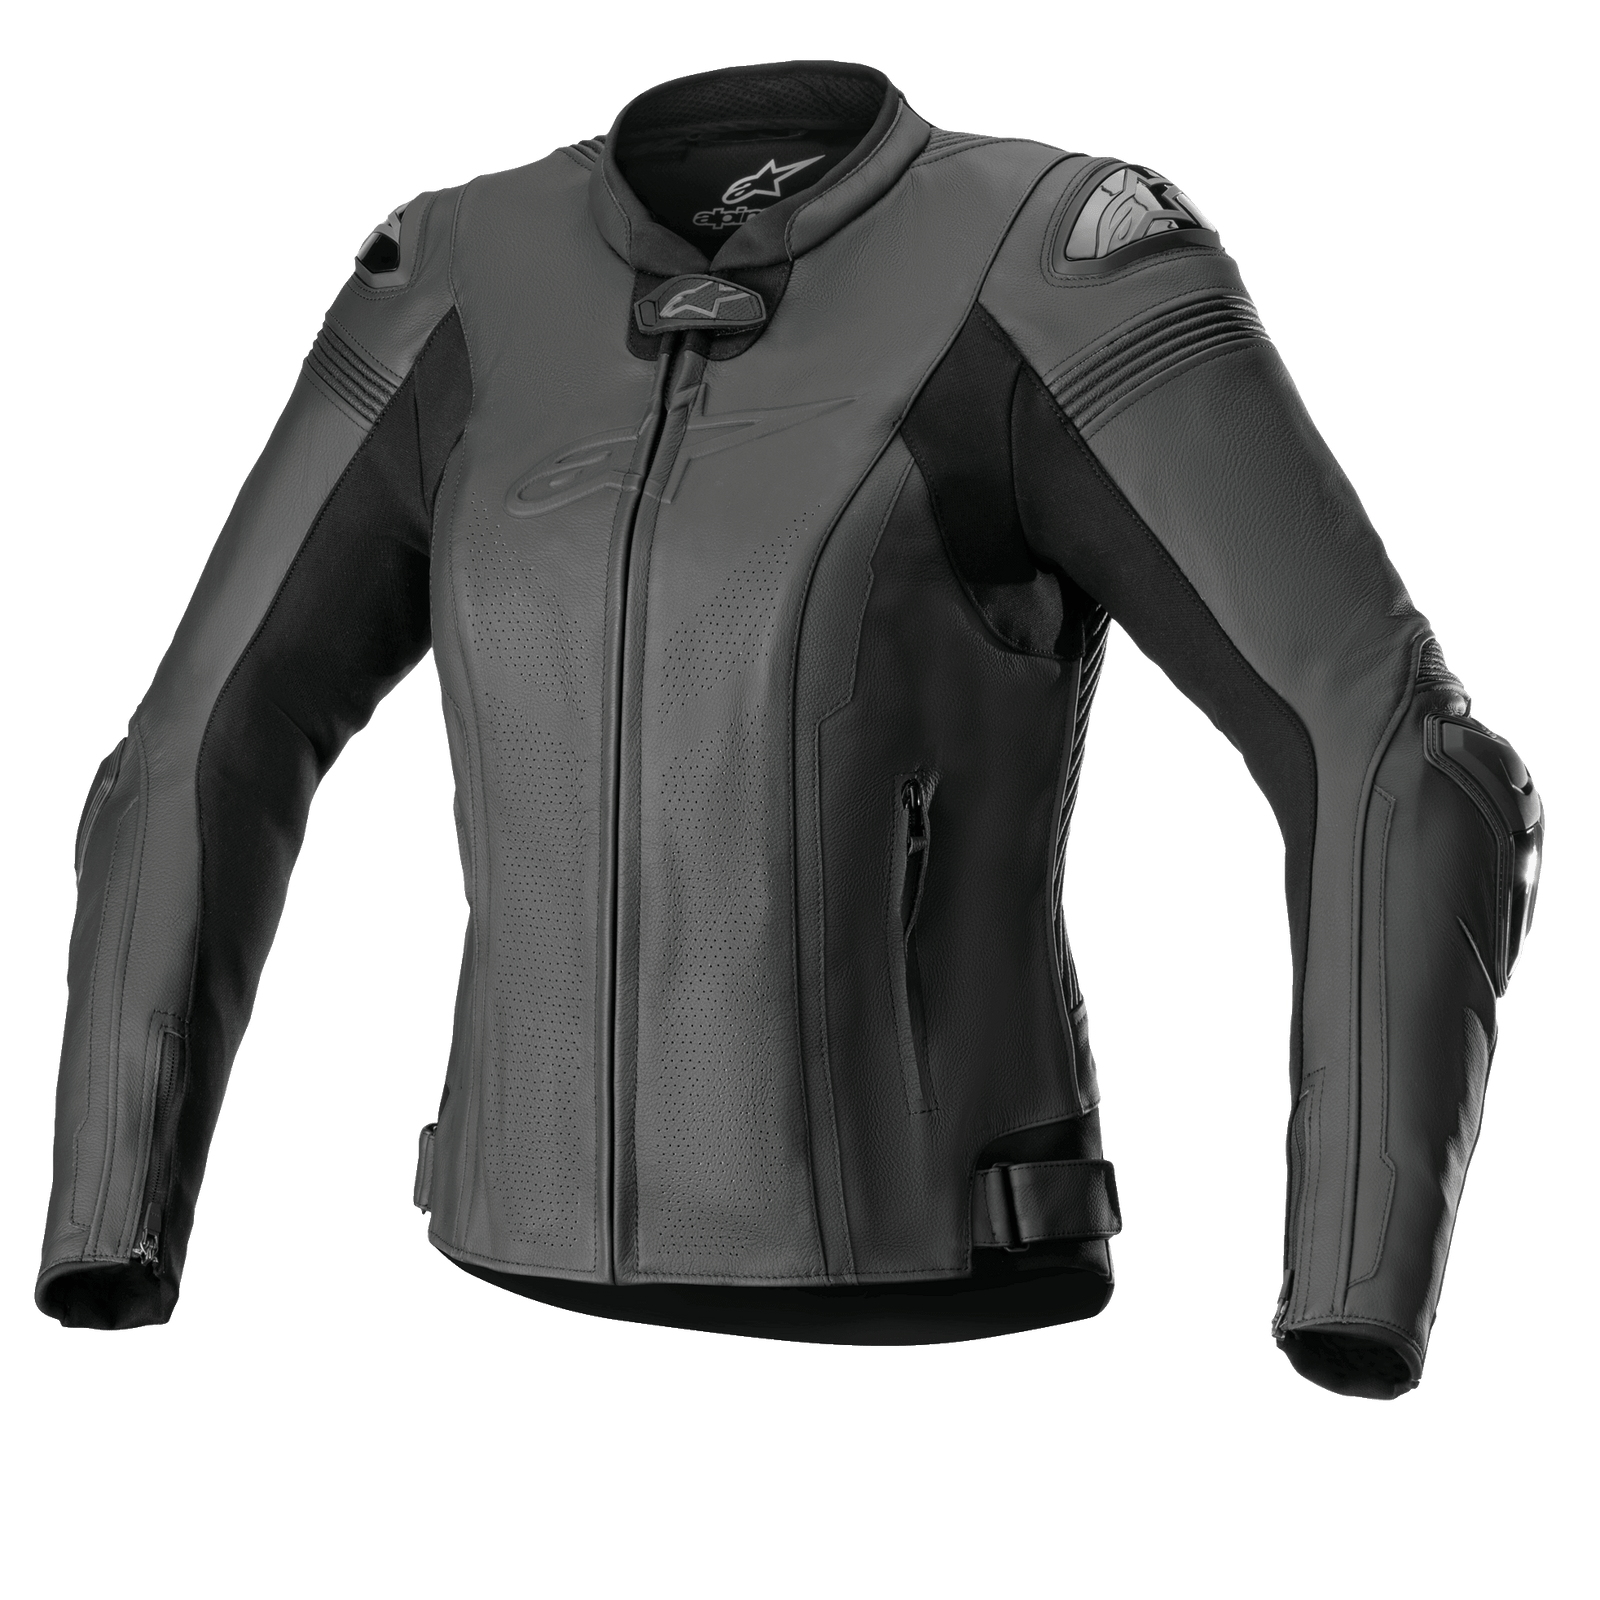 Women's Motorcycle Collection | Alpinestars® Official Site